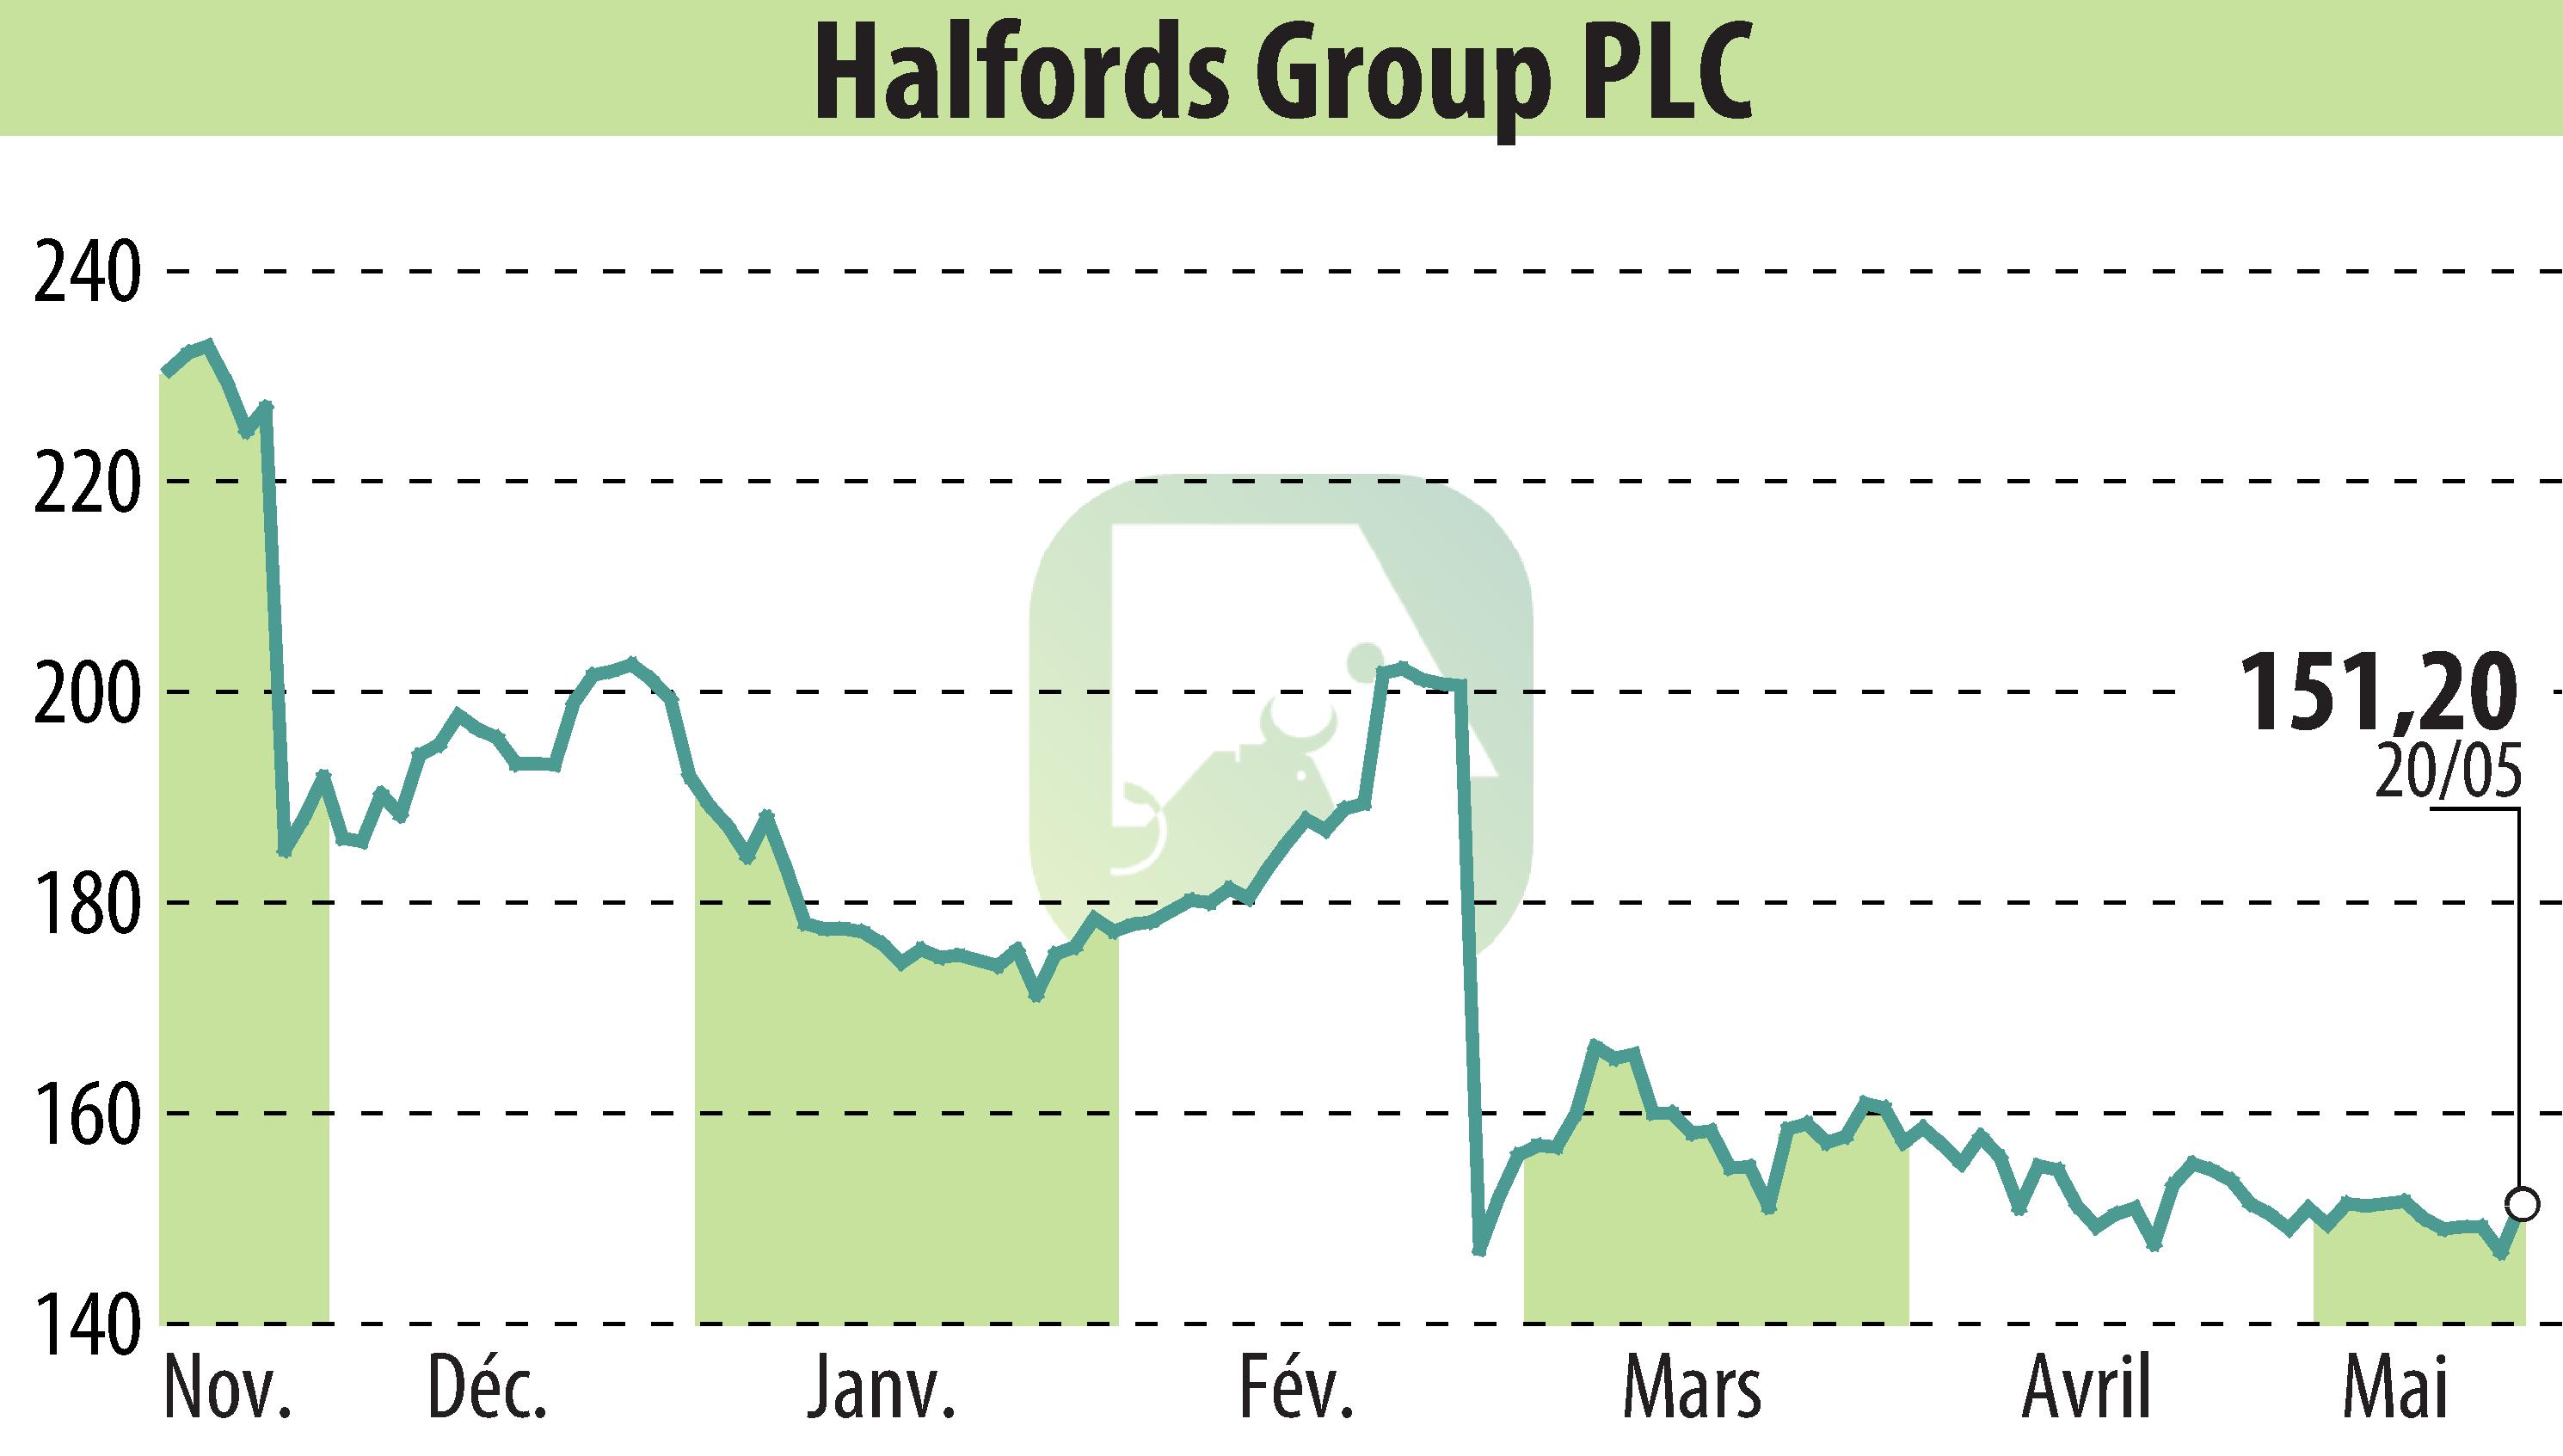 Stock price chart of Halfords (EBR:HFD) showing fluctuations.